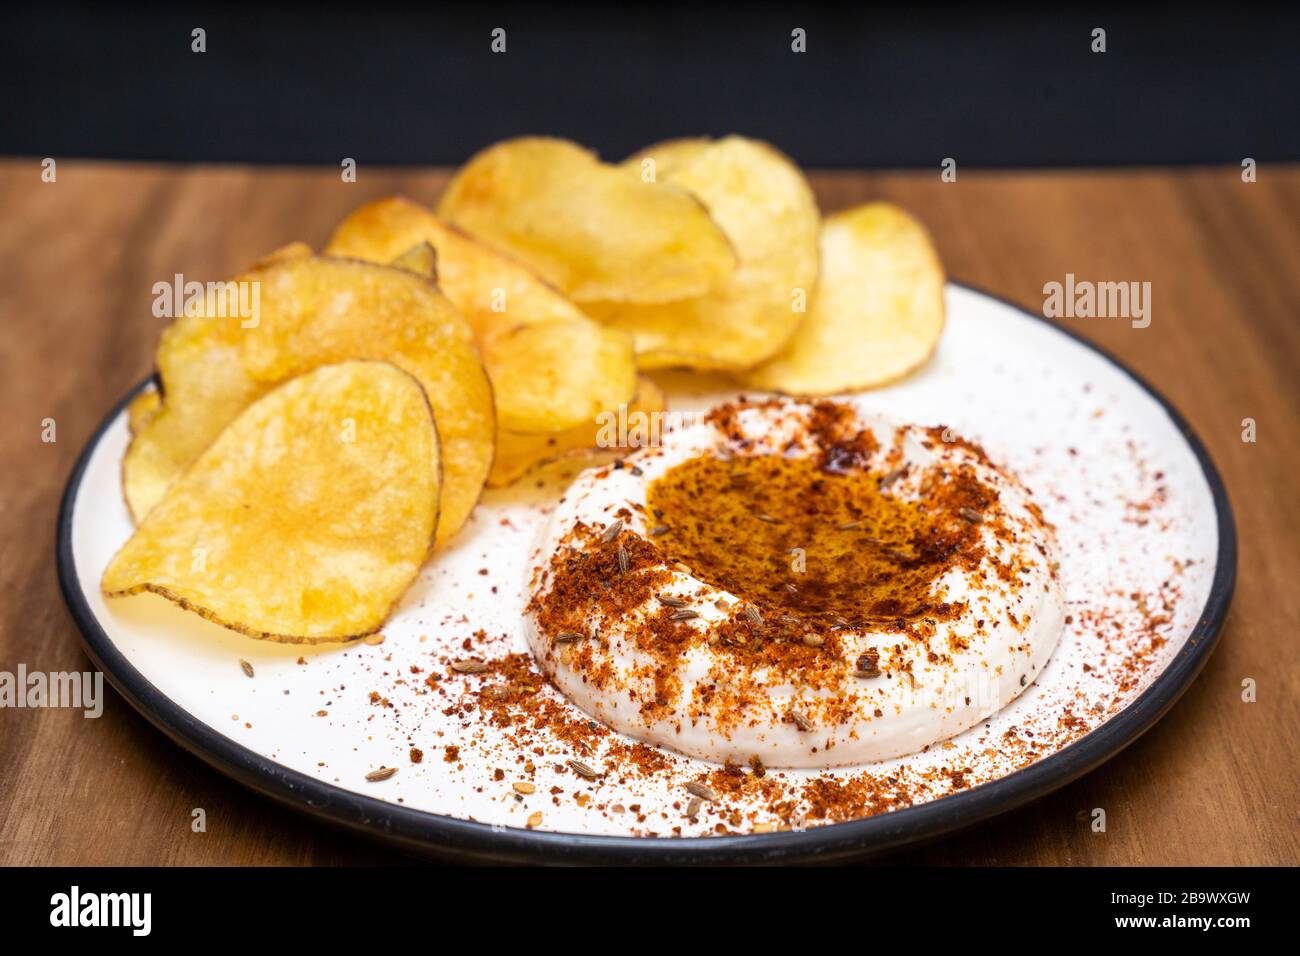 Taramasalata with baharat Middle Eastern spice mix and crisps Stock Photo